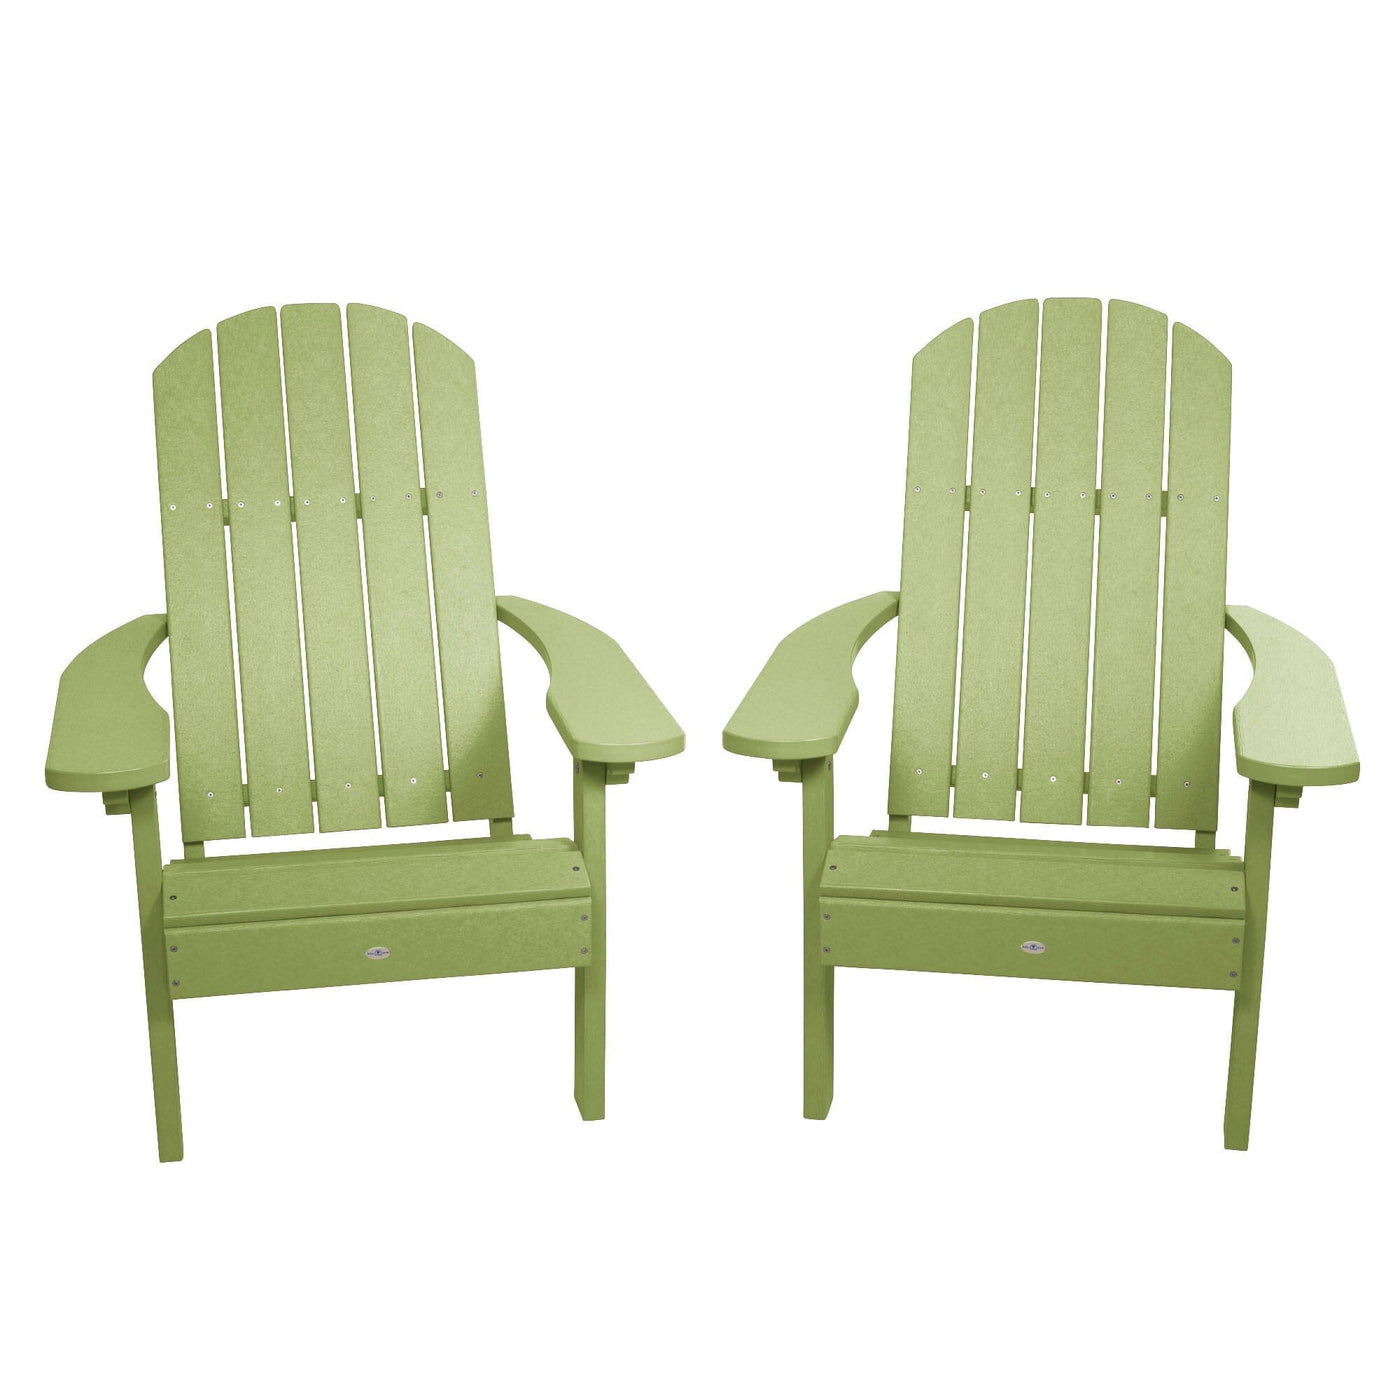 Cape Classic Adirondack Chair (Set of 2) Kitted Set Bahia Verde Outdoors Palm Green 